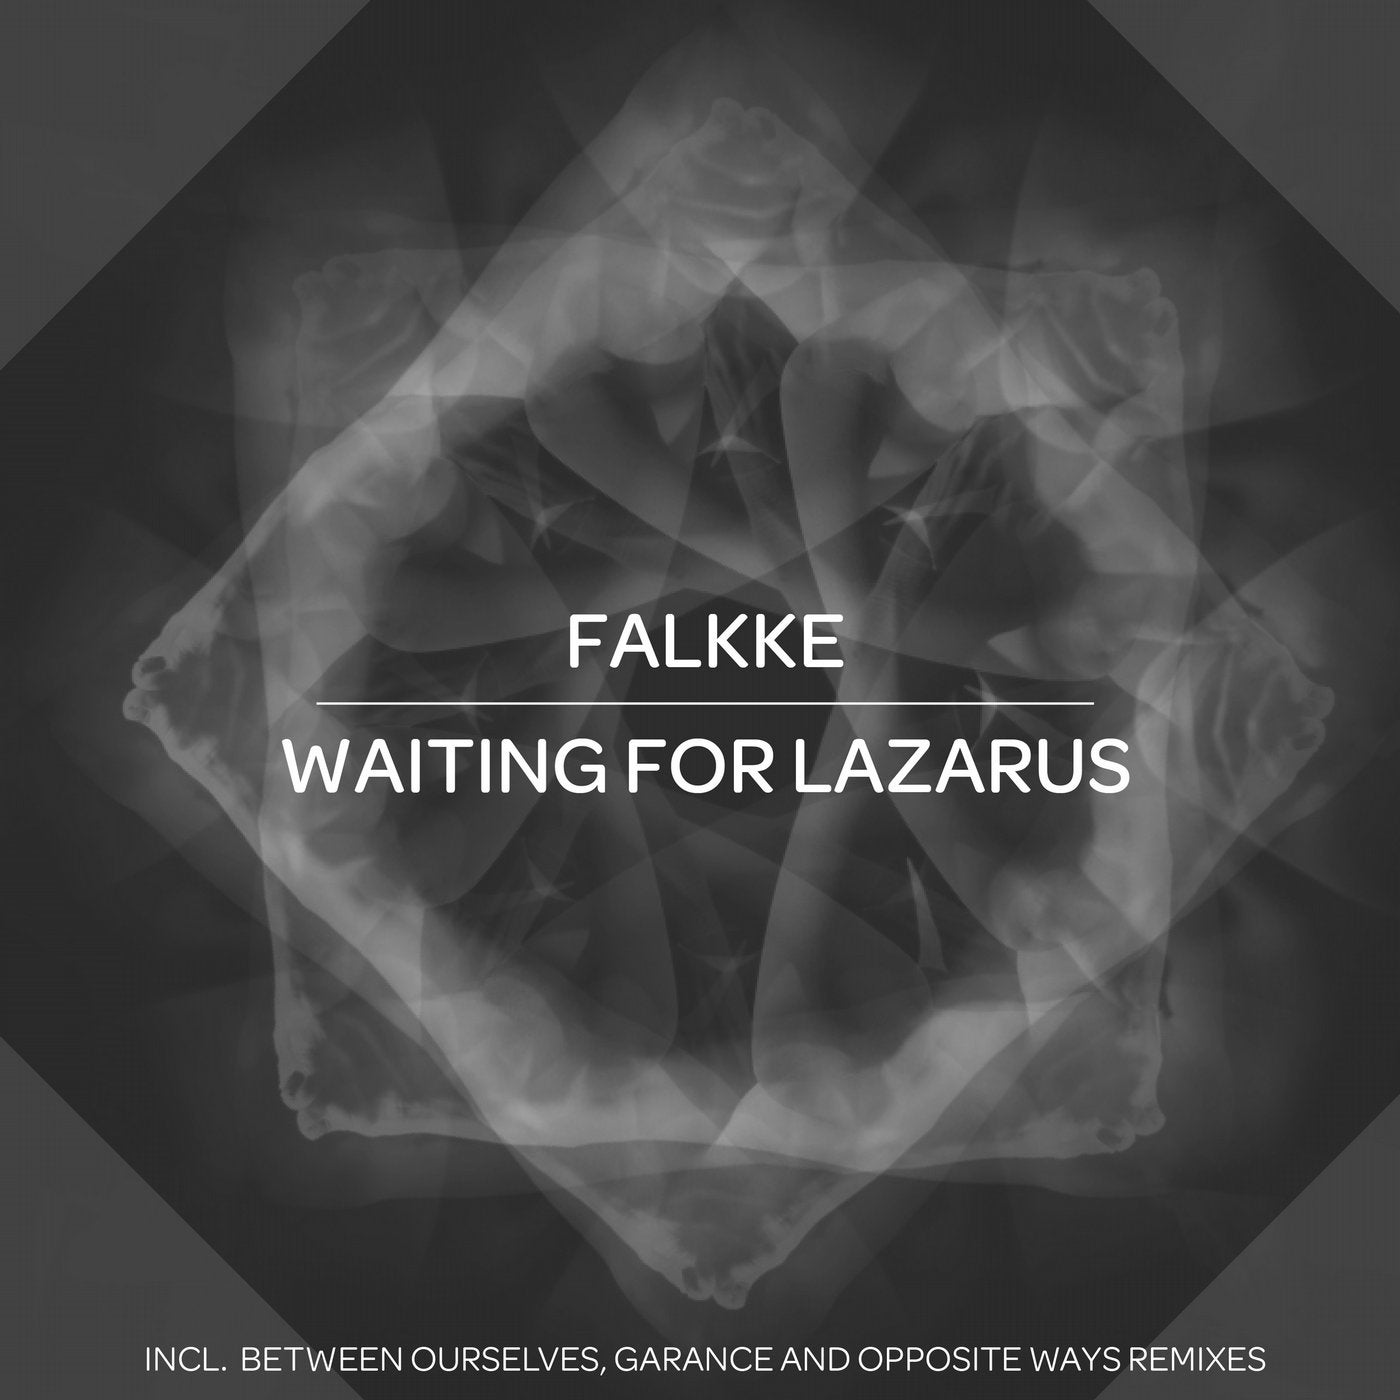 Waiting for Lazarus